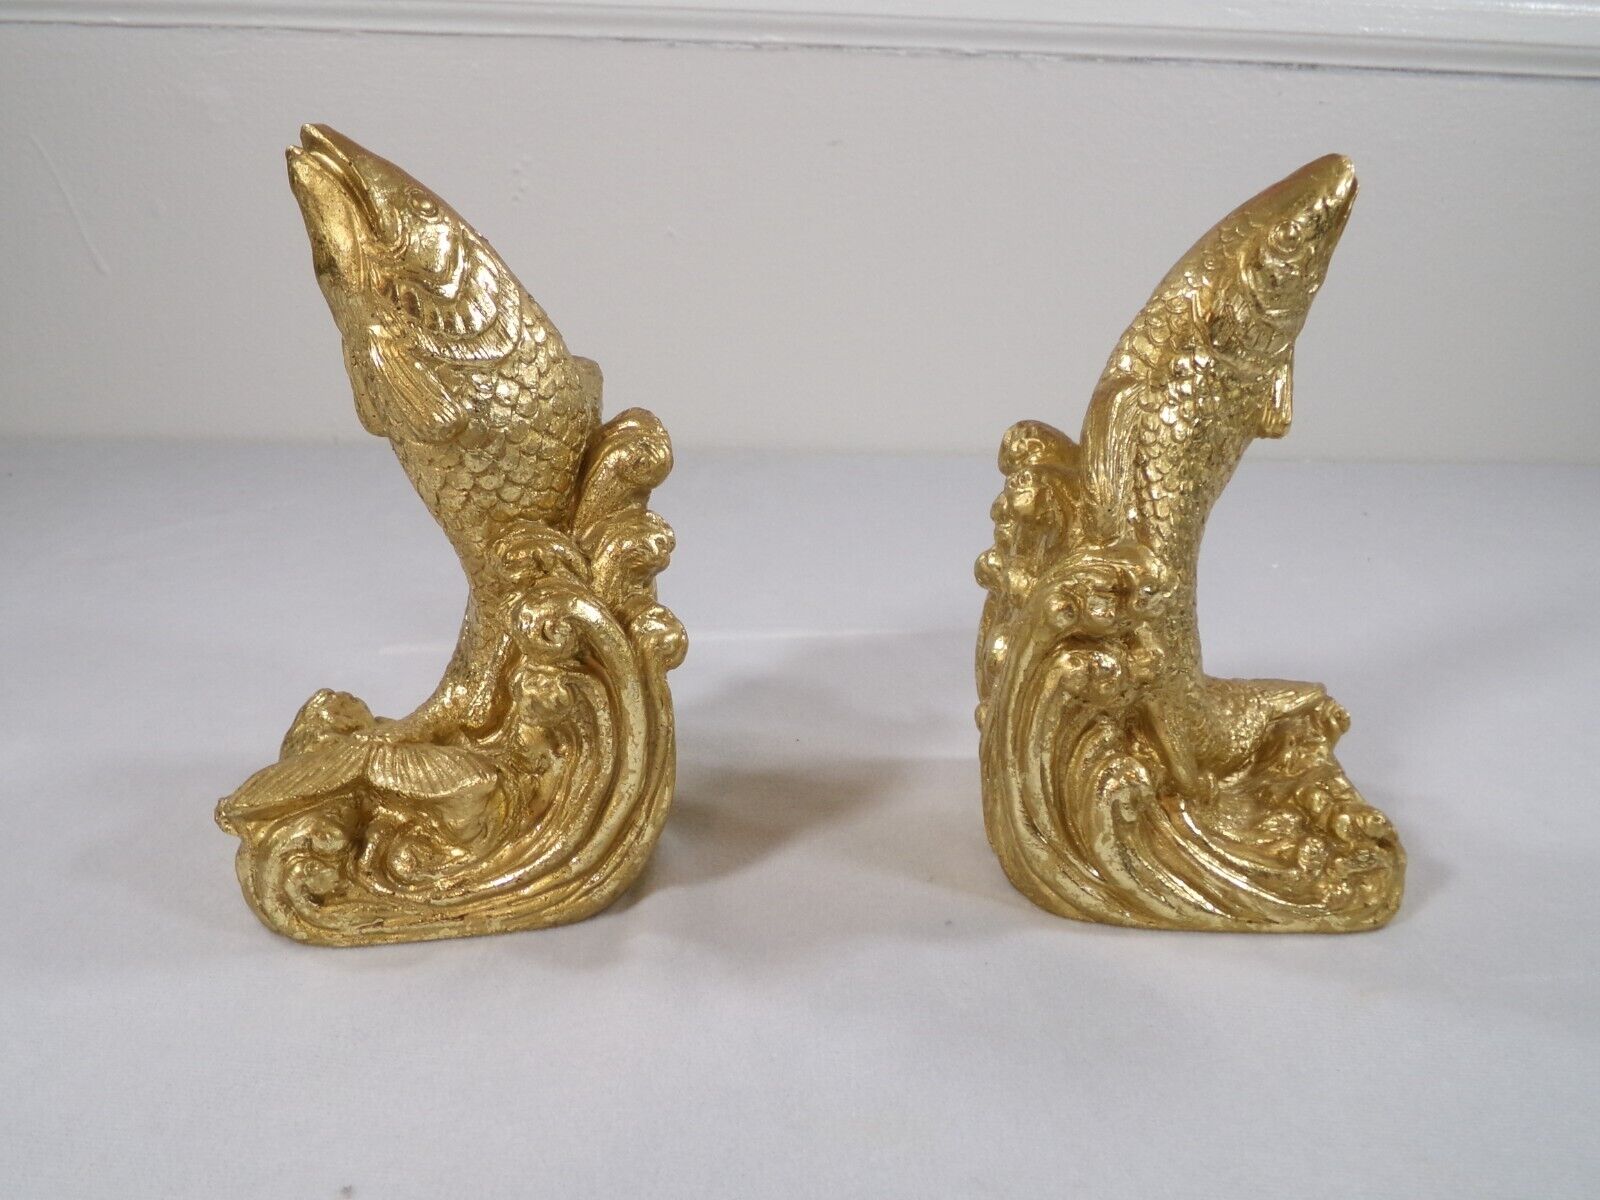 VINTAGE RARE KOI FISH BOOKENDS HEAVEY ENOUGH TO HOLD BOOKS INPLACE BEAUTIFULLY